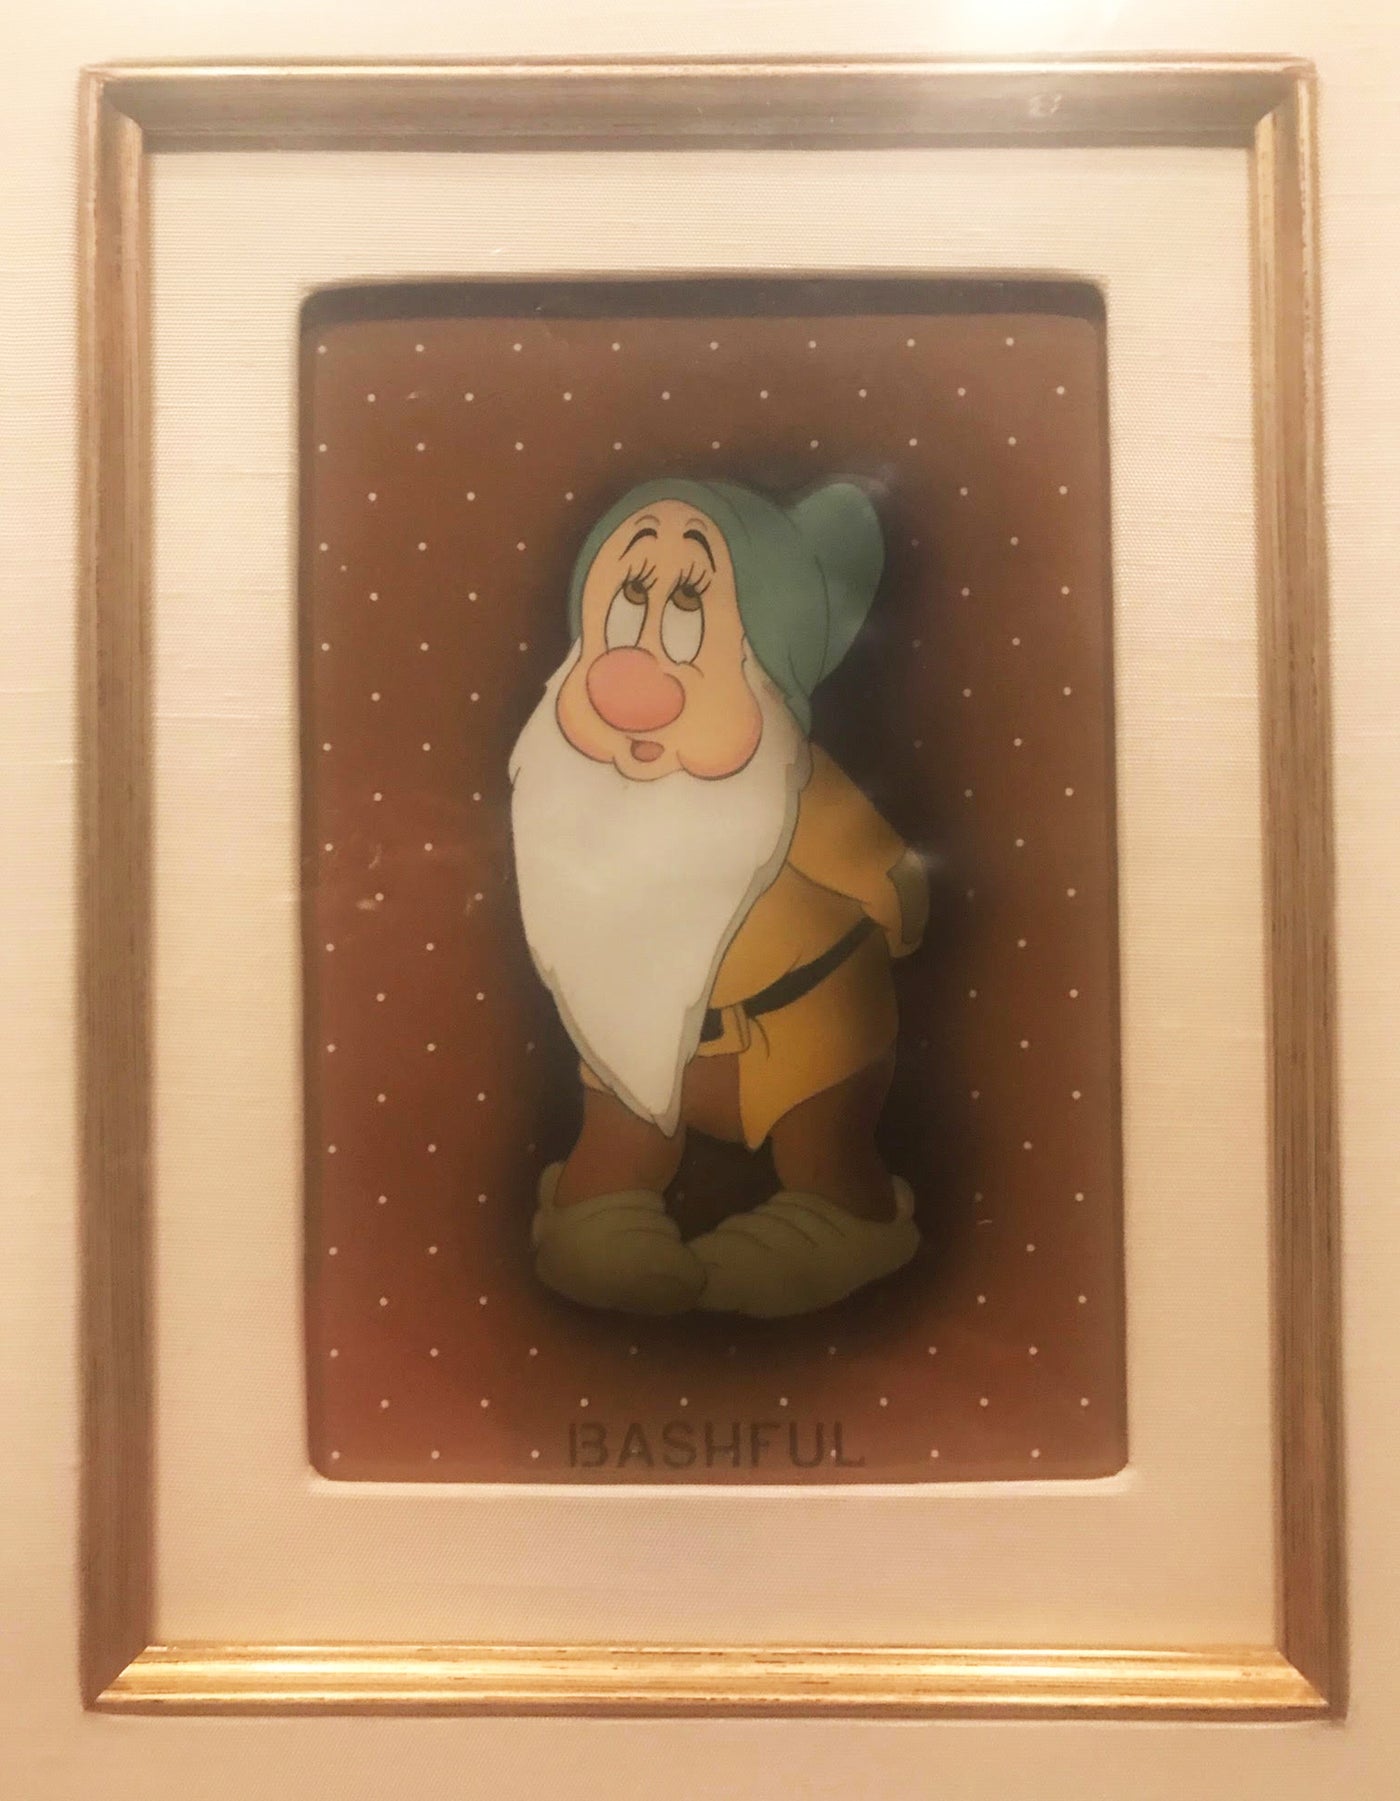 Original Walt Disney Production Cel on Courvoisier Background from Snow White and the Seven Dwarfs featuring Bashful